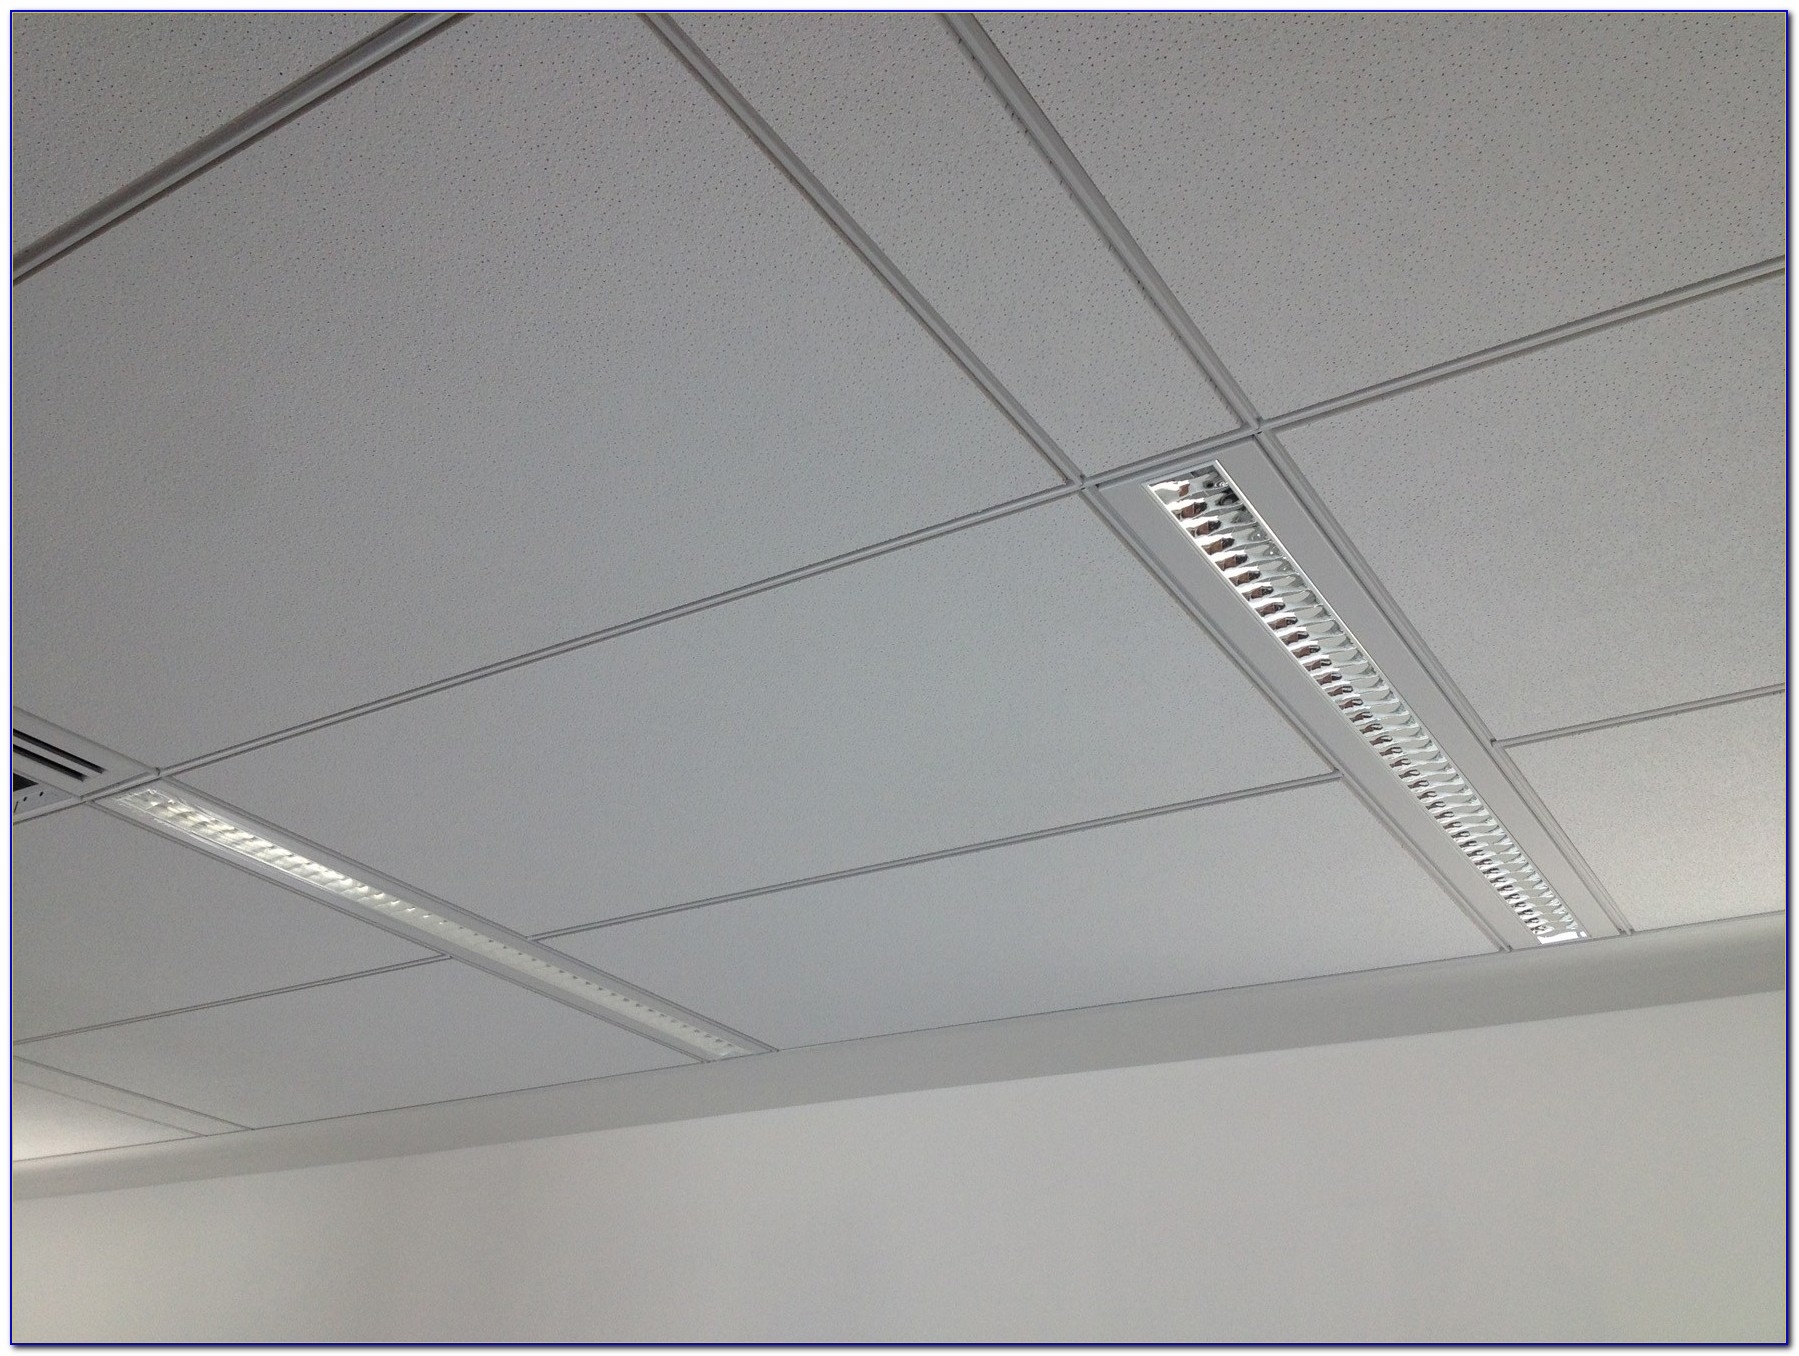 Armstrong Acoustical Ceiling Tiles Msdsarmstrong acoustical ceiling tiles msds tiles home design